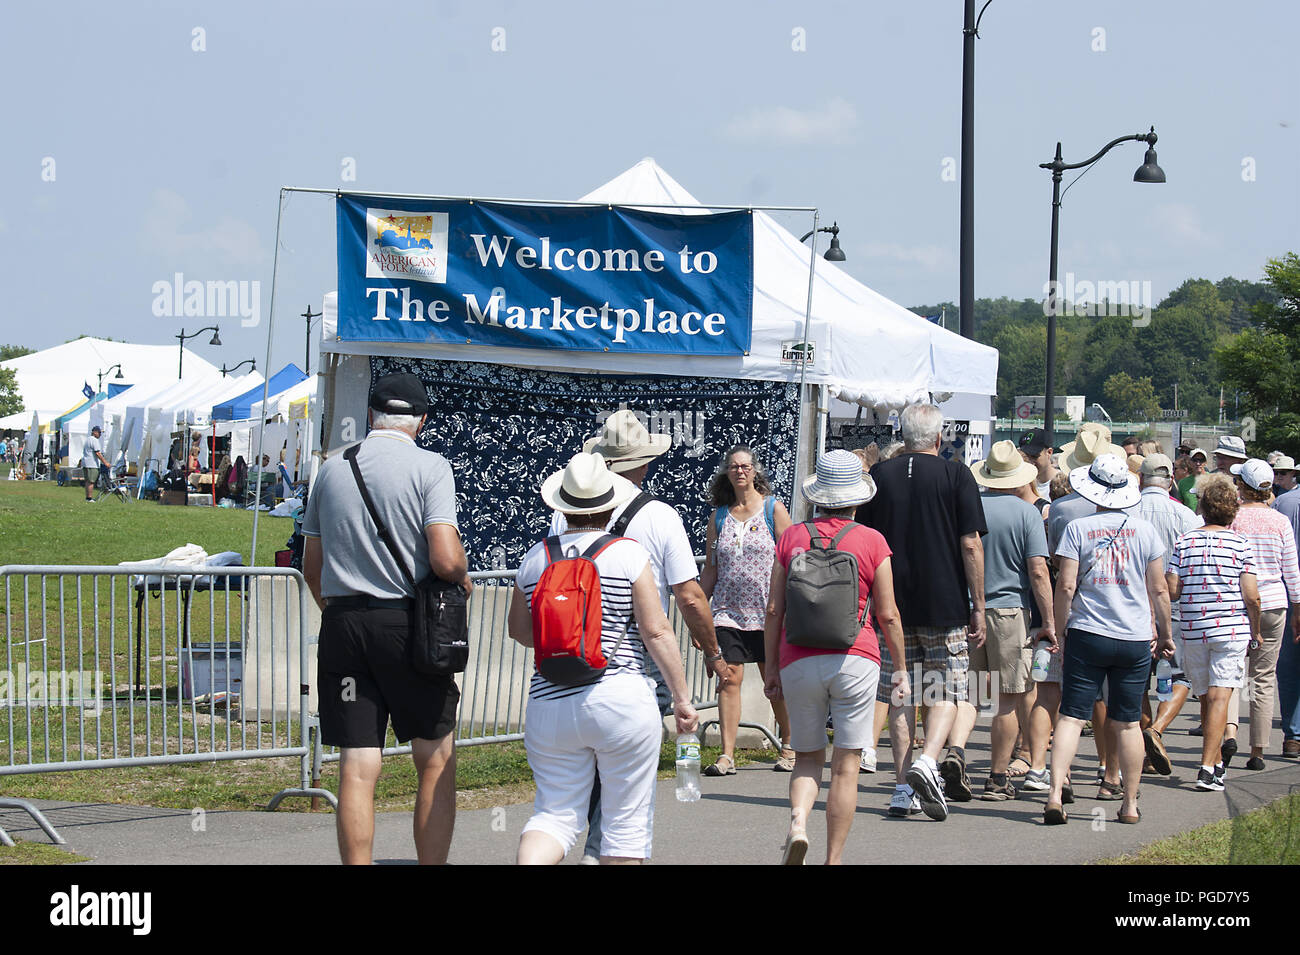 Bangor, Maine, USA.25th August, 2018. Crowds at the American Folk Festival. This festival was named one of the world's best music festivals by Conde Nast Traveller. Located on the banks of the Penobscot River, the weather is almost always perfect, with a cool breeze and sunny skies. Tourists come from all over the world to listen to a variety of folk music, shop for crafts at the markeplace  and sample great food. Credit: Janet S. Robbins/Alamy Live News Stock Photo